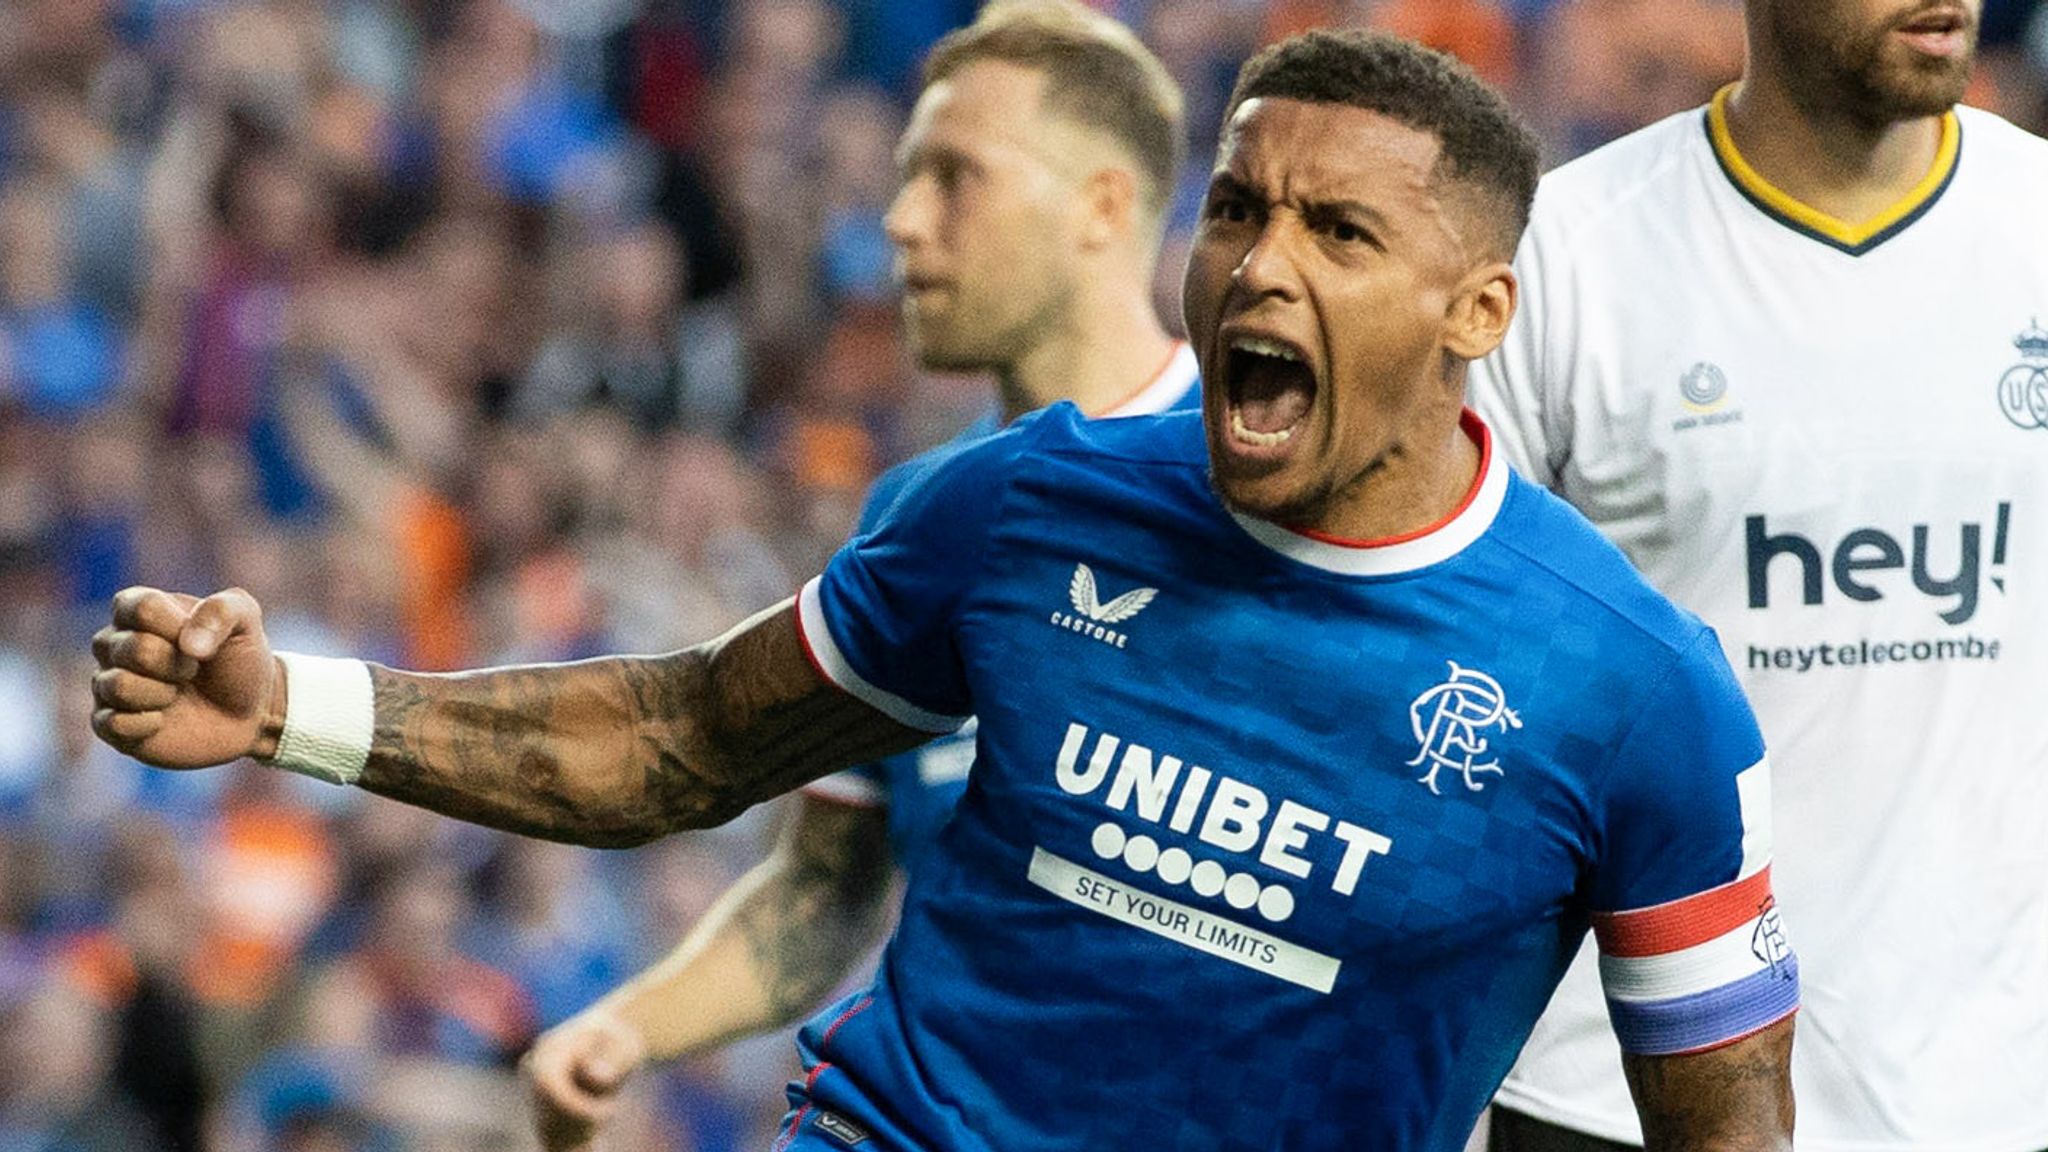 James Tavernier to sign new Rangers contract - Got The Battle Fever On